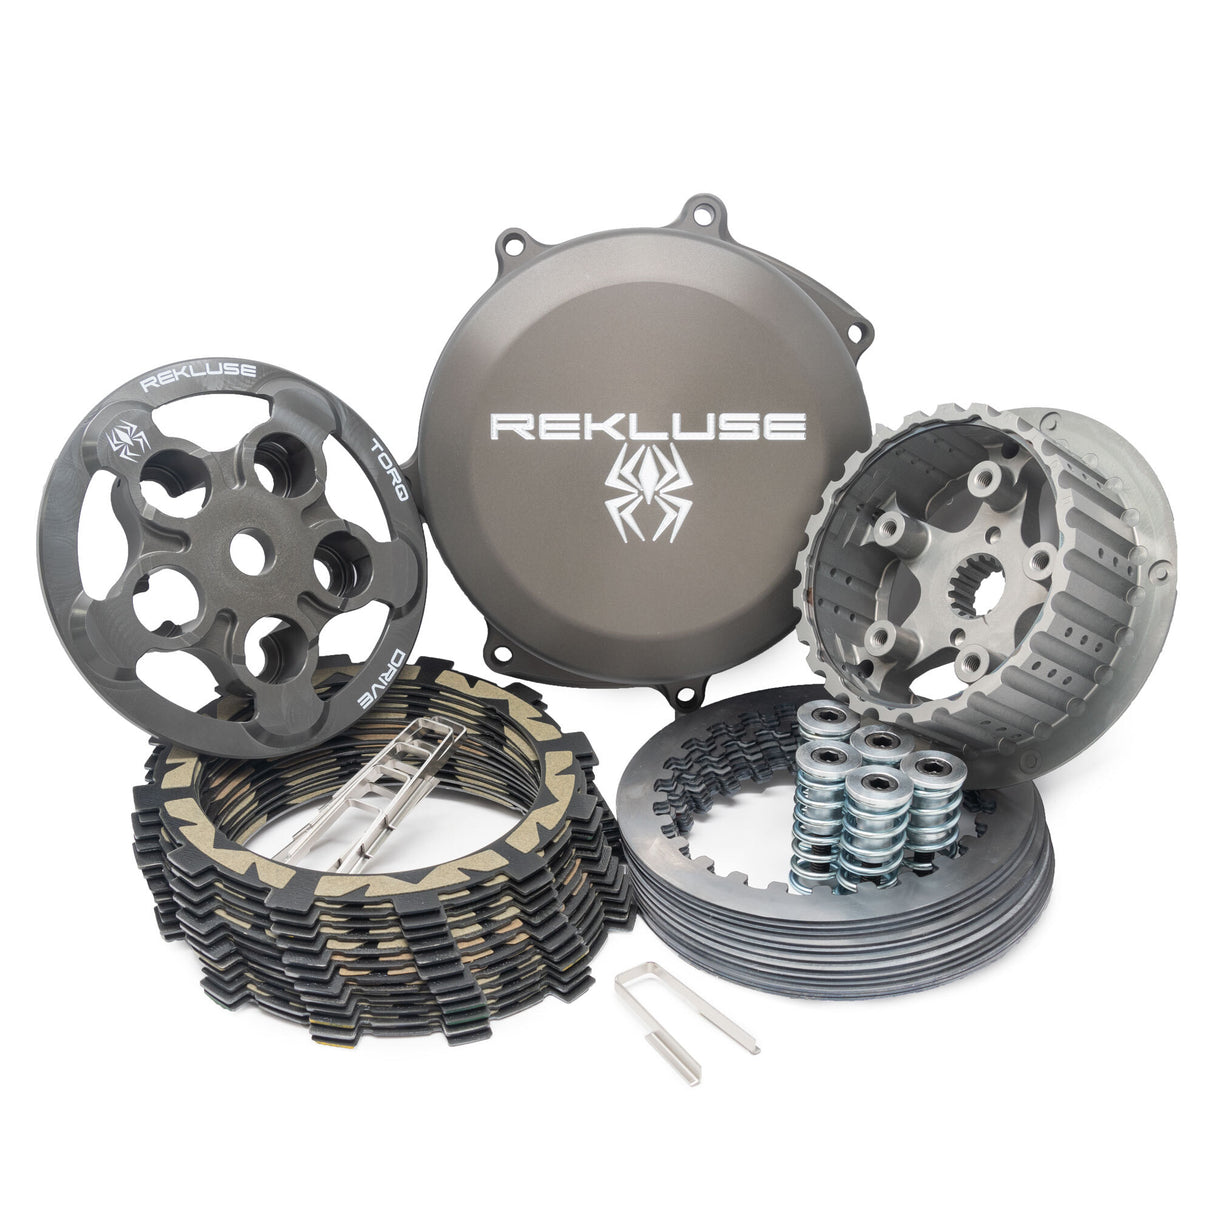 REKLUSE RACING Core Manual Torq Drive Clutch Kaw for Powersports